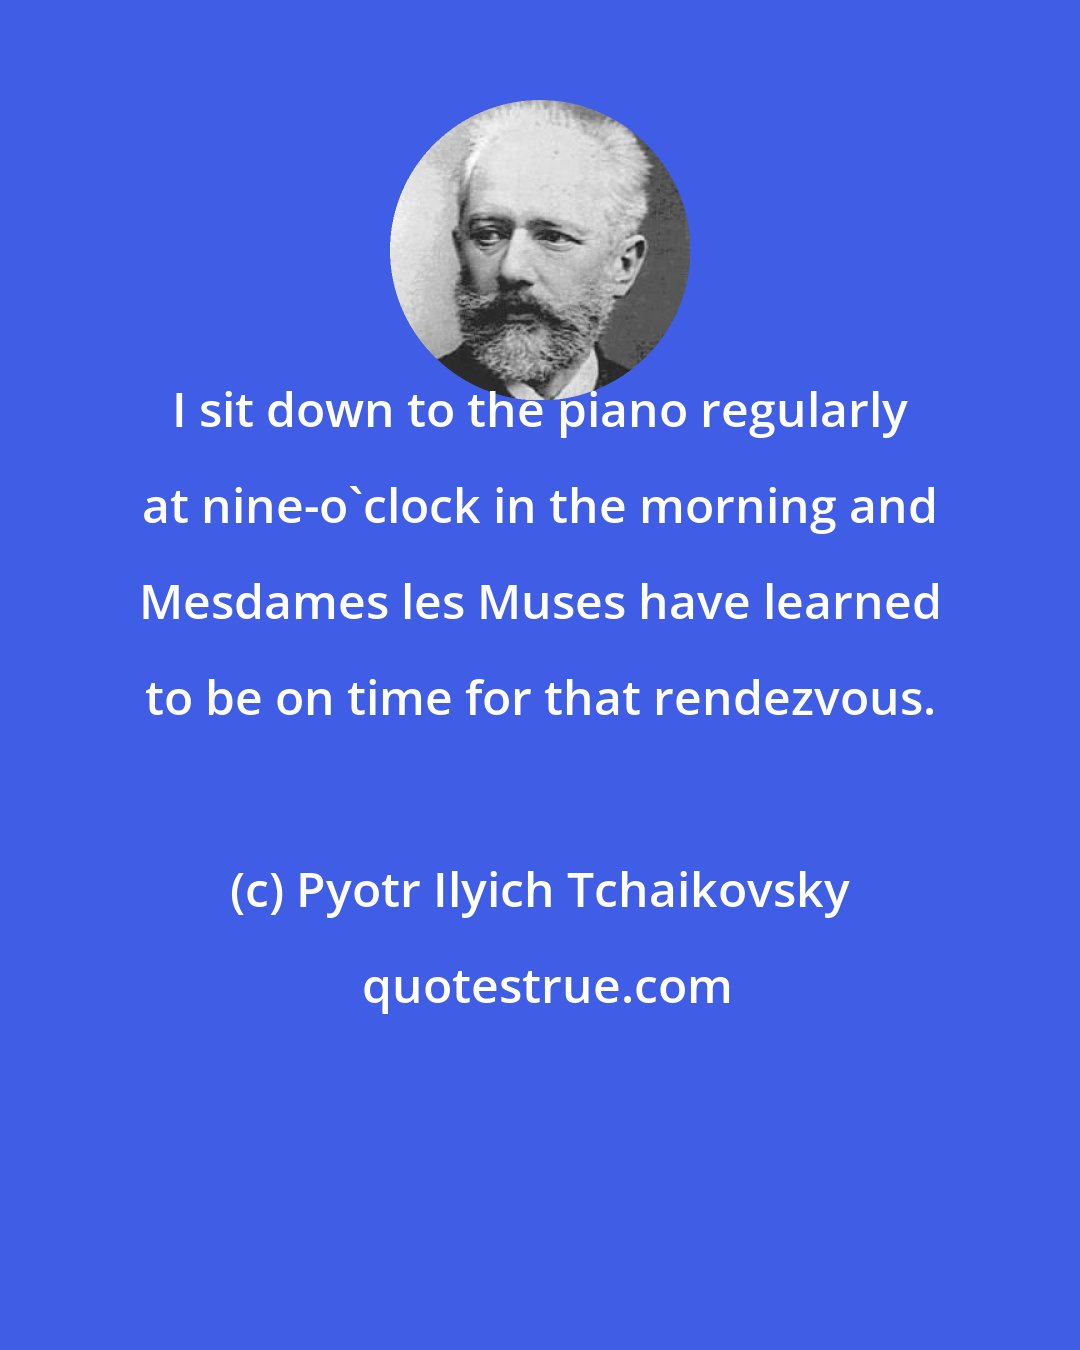 Pyotr Ilyich Tchaikovsky: I sit down to the piano regularly at nine-o'clock in the morning and Mesdames les Muses have learned to be on time for that rendezvous.